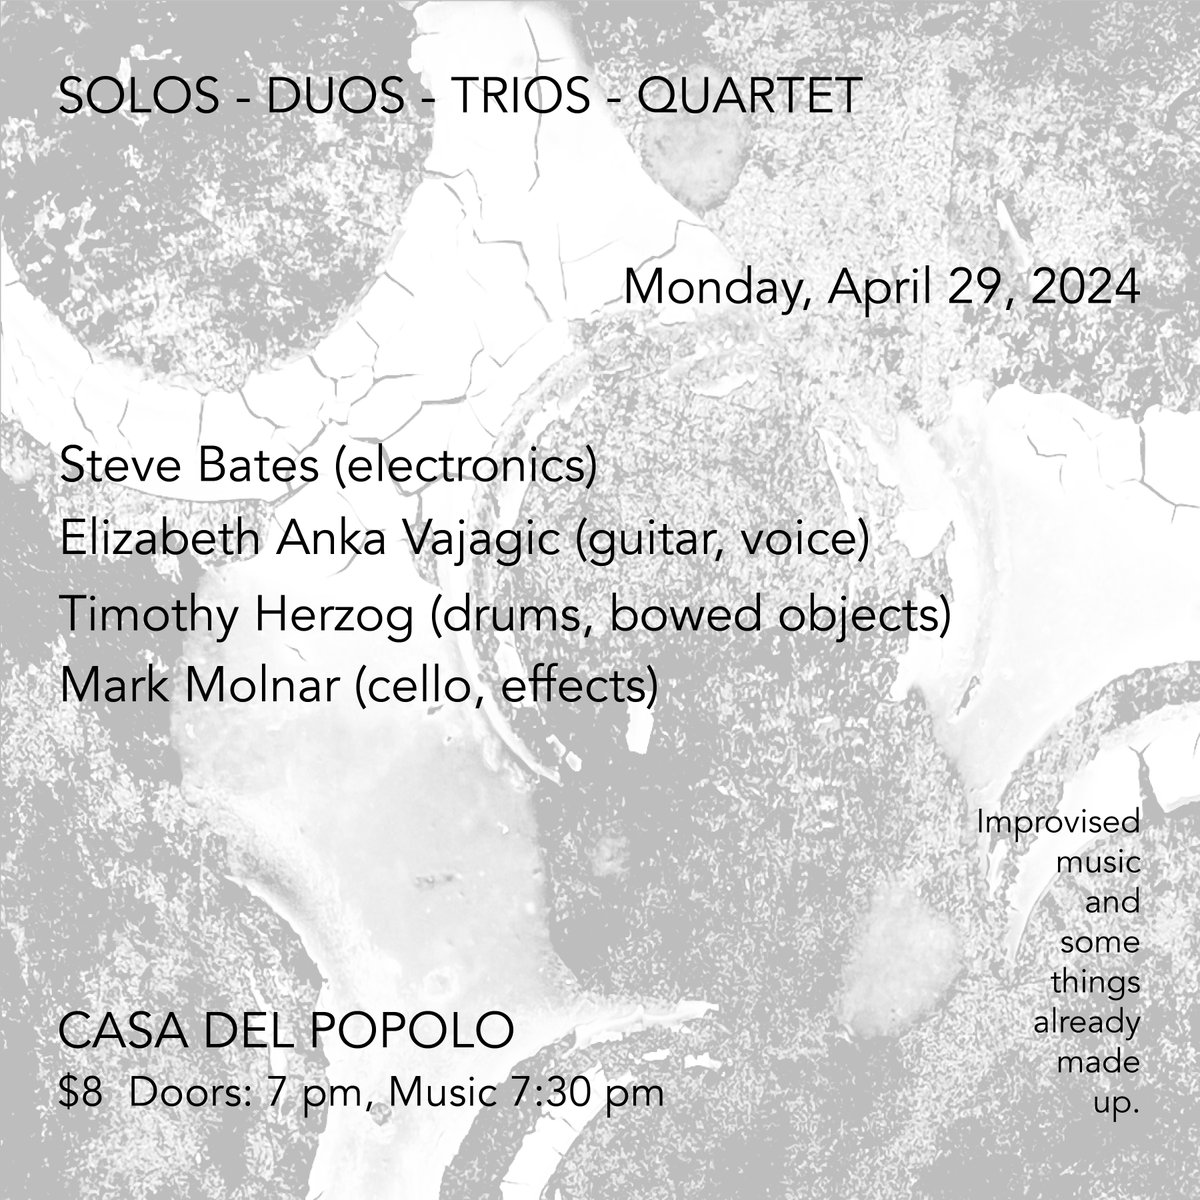 Electronic musician Steve Bates has announced an evening of solo, duo, trio, and quartet performances with Elizabeth Anka Vajagic (guitar, voice), Timothy Herzog (drums), and Mark Molnar (cello). Happening Monday 29 April at Casa del Popolo in Montreal. casadelpopolo.com/en/events/2024…